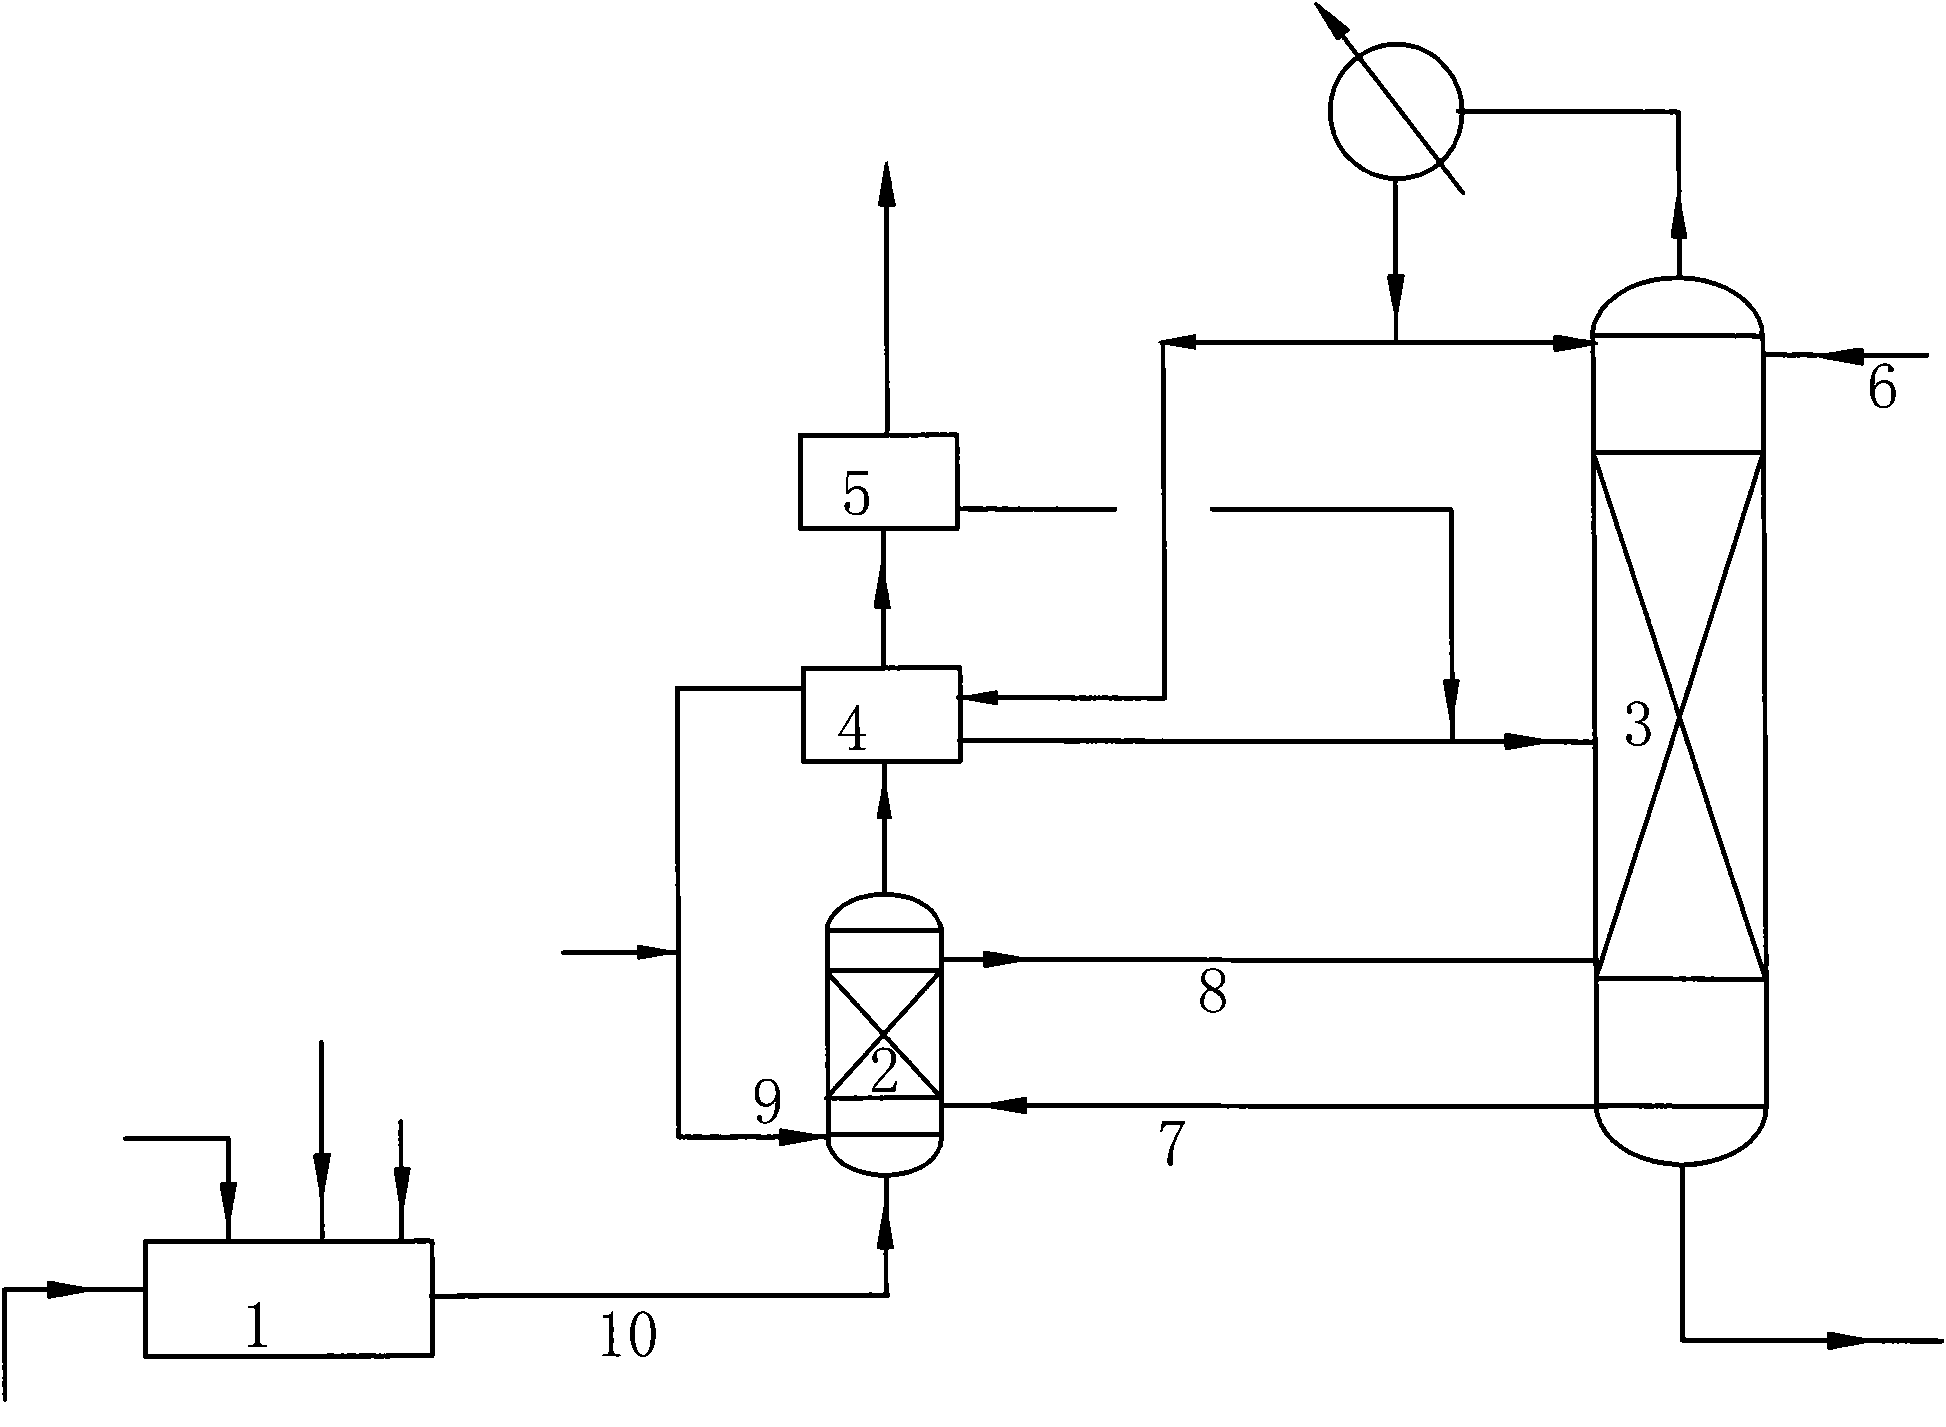 Synthesizing device and process for alkyl nitrite